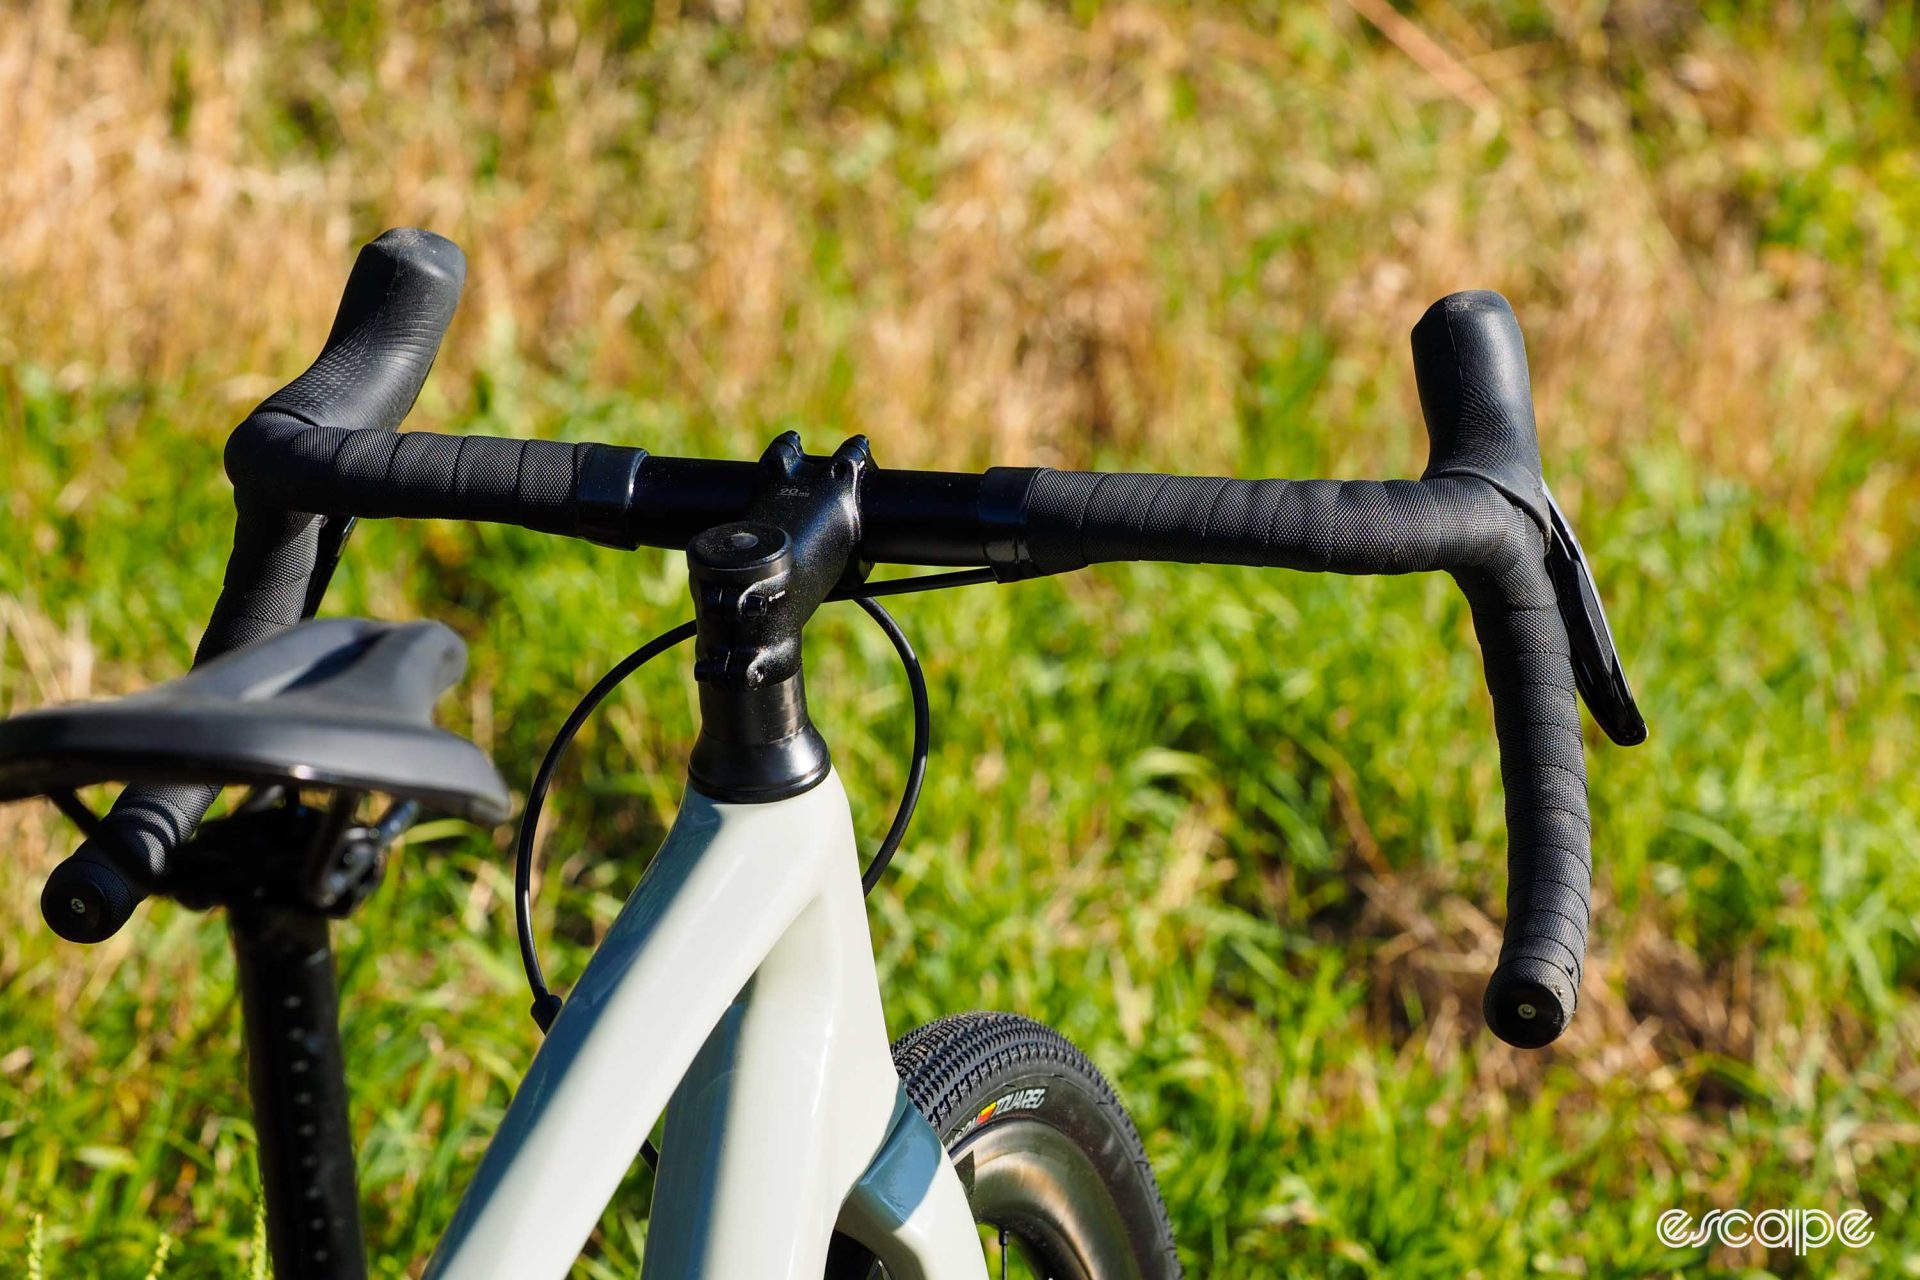 Handlebar from the rear, showing a slight flare to the drops and flattened top section.